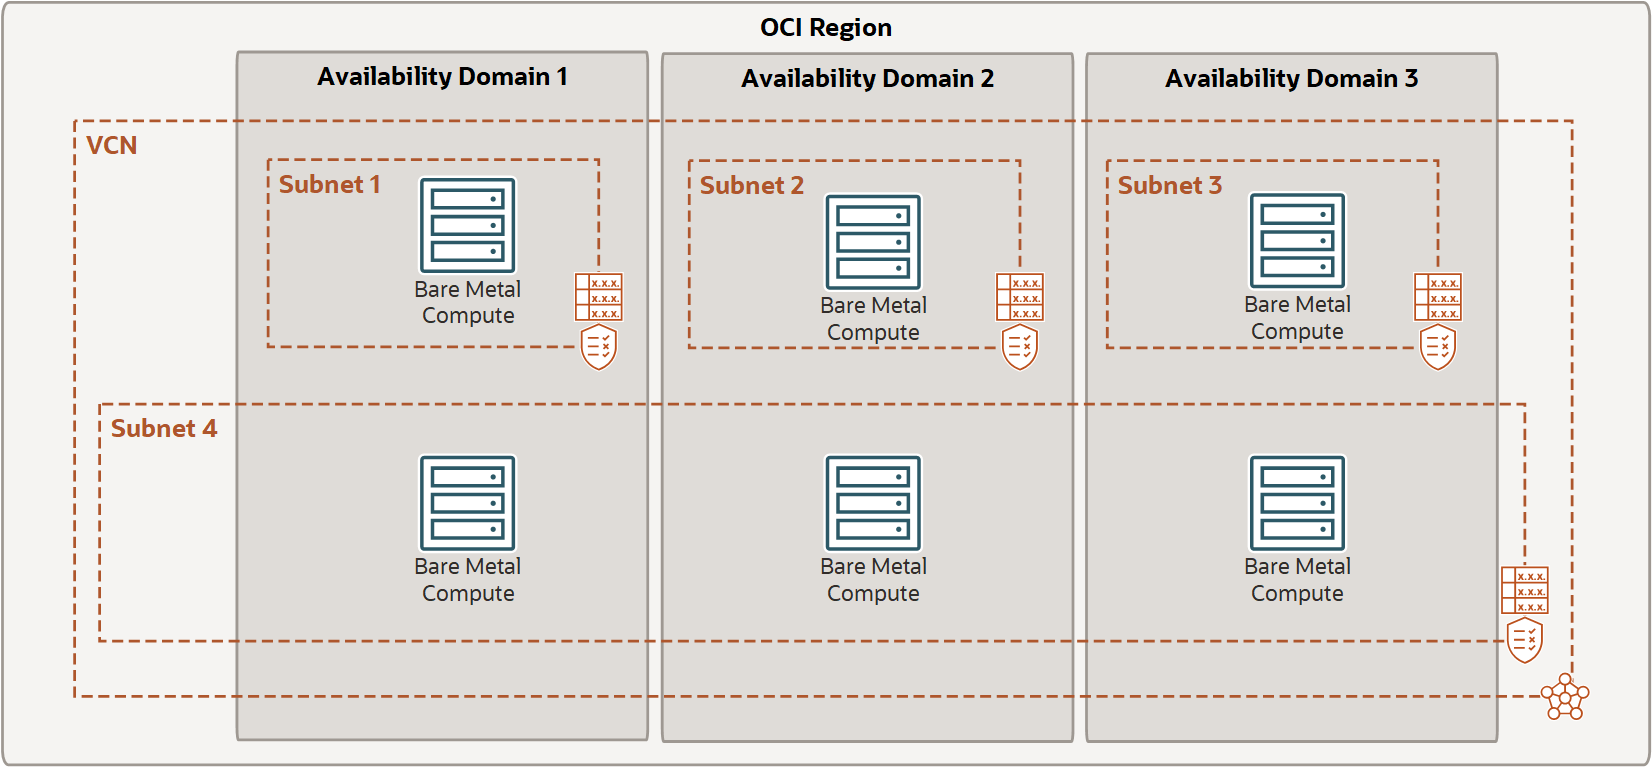 This image shows a VCN with a regional subnet and three AD-specific subnets.